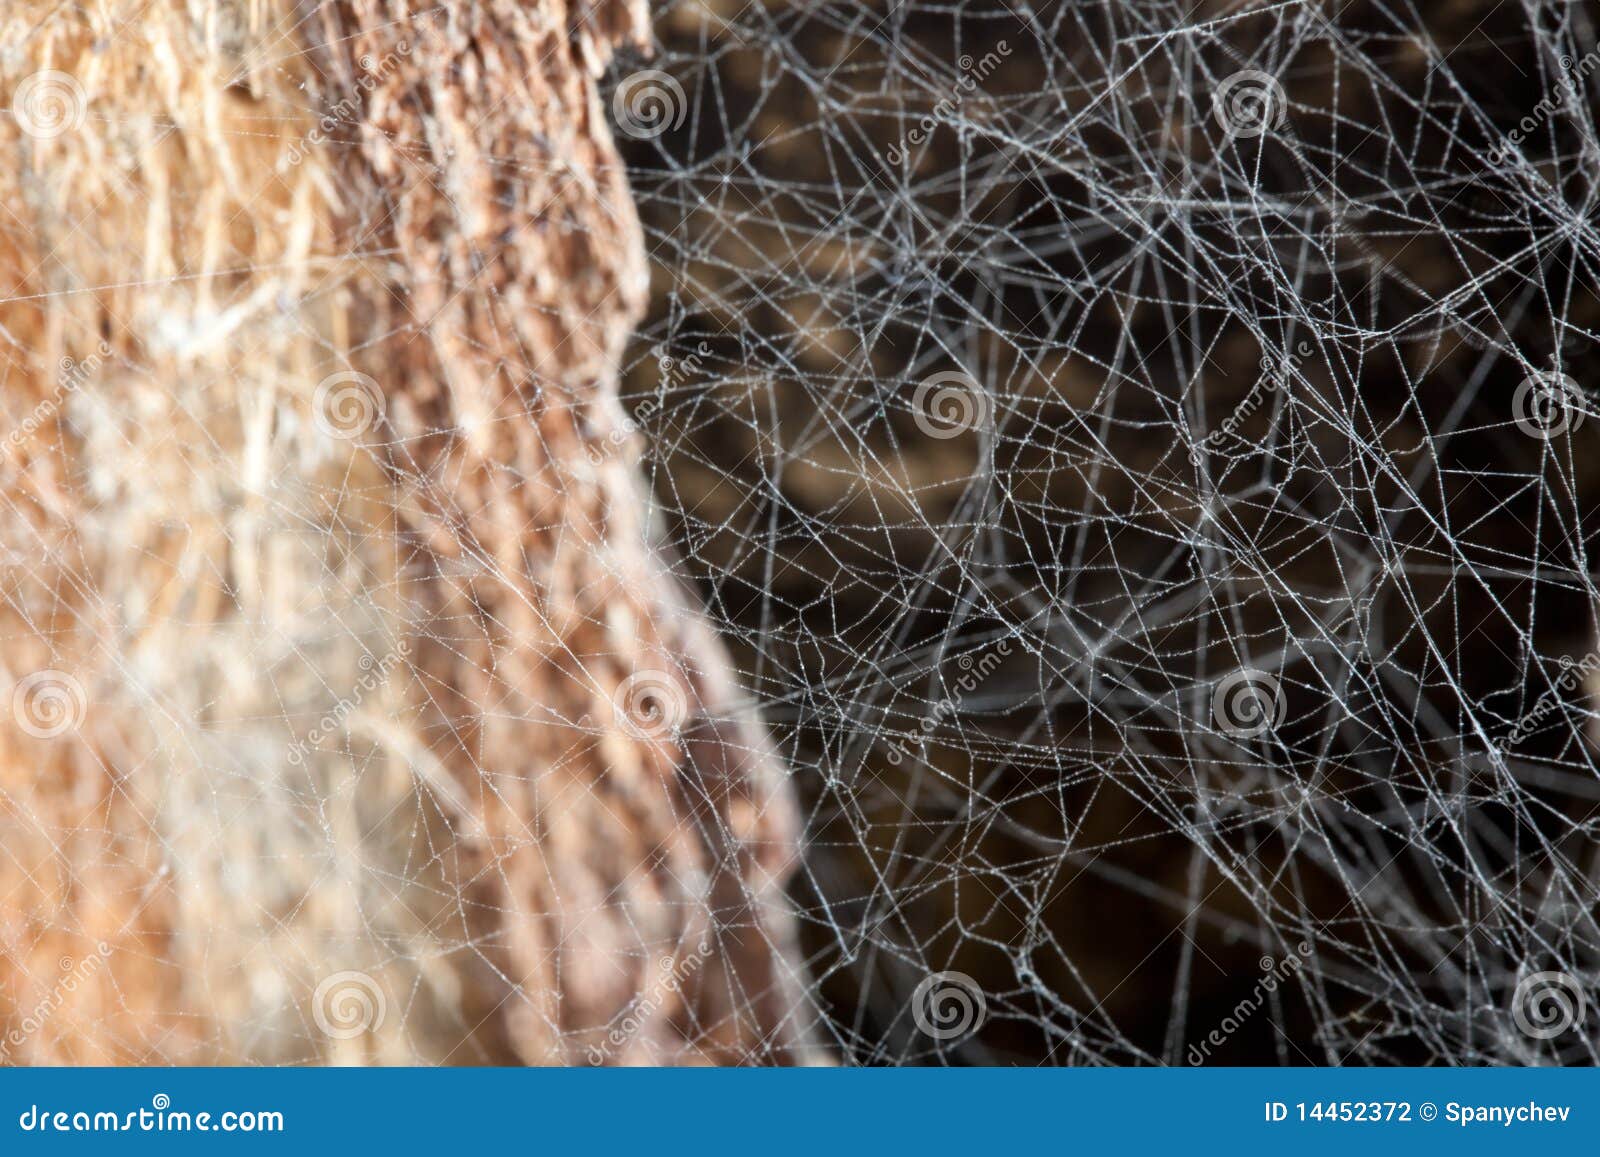 Old web